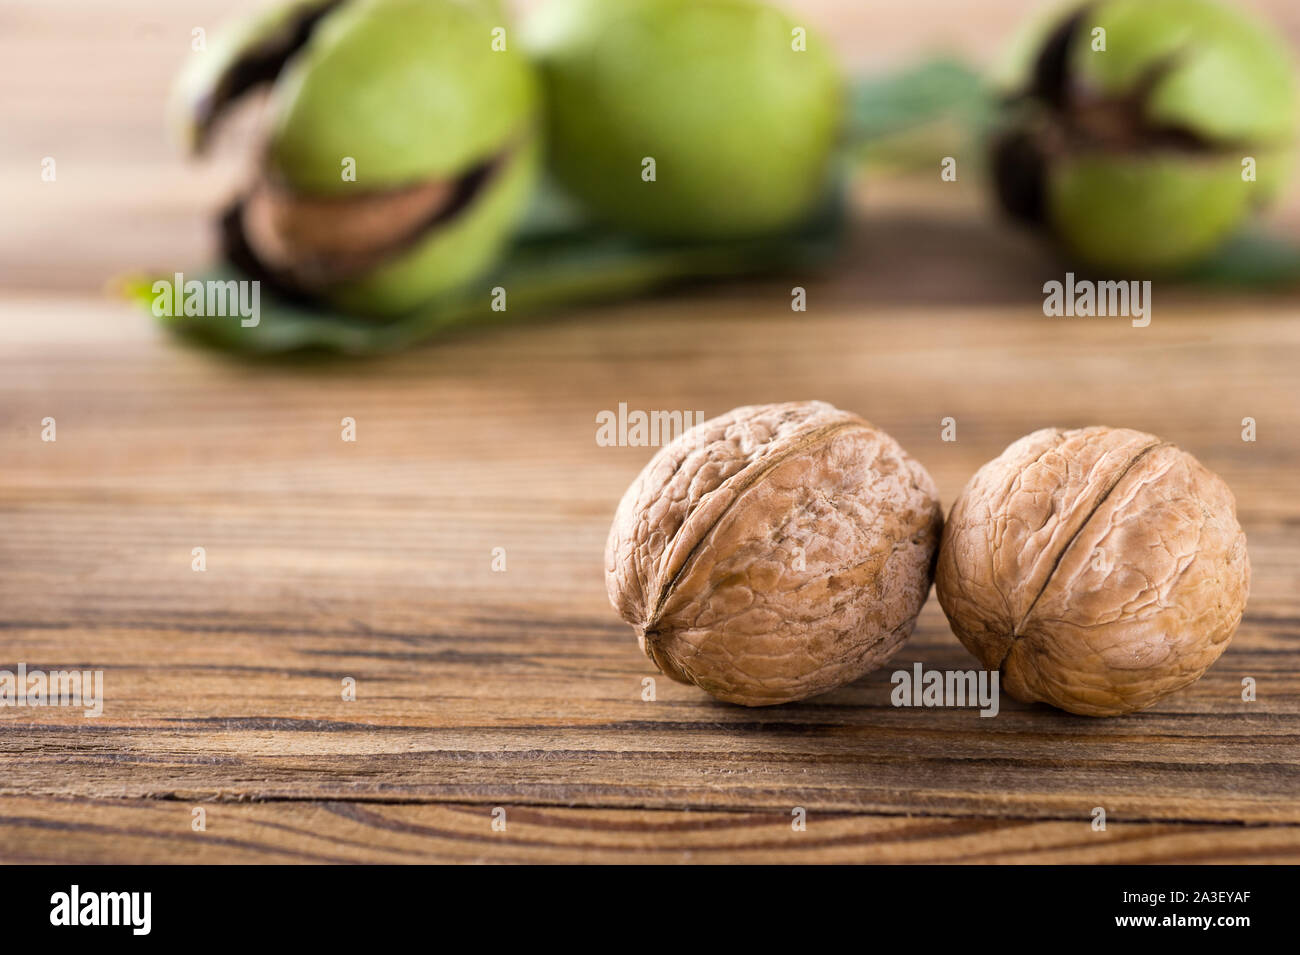 Two fresh ripe walnuts on the wooden background. Harvest Of Walnuts In A Green Shell. Autumn concept.Selective focus.Horizontal. Stock Photo